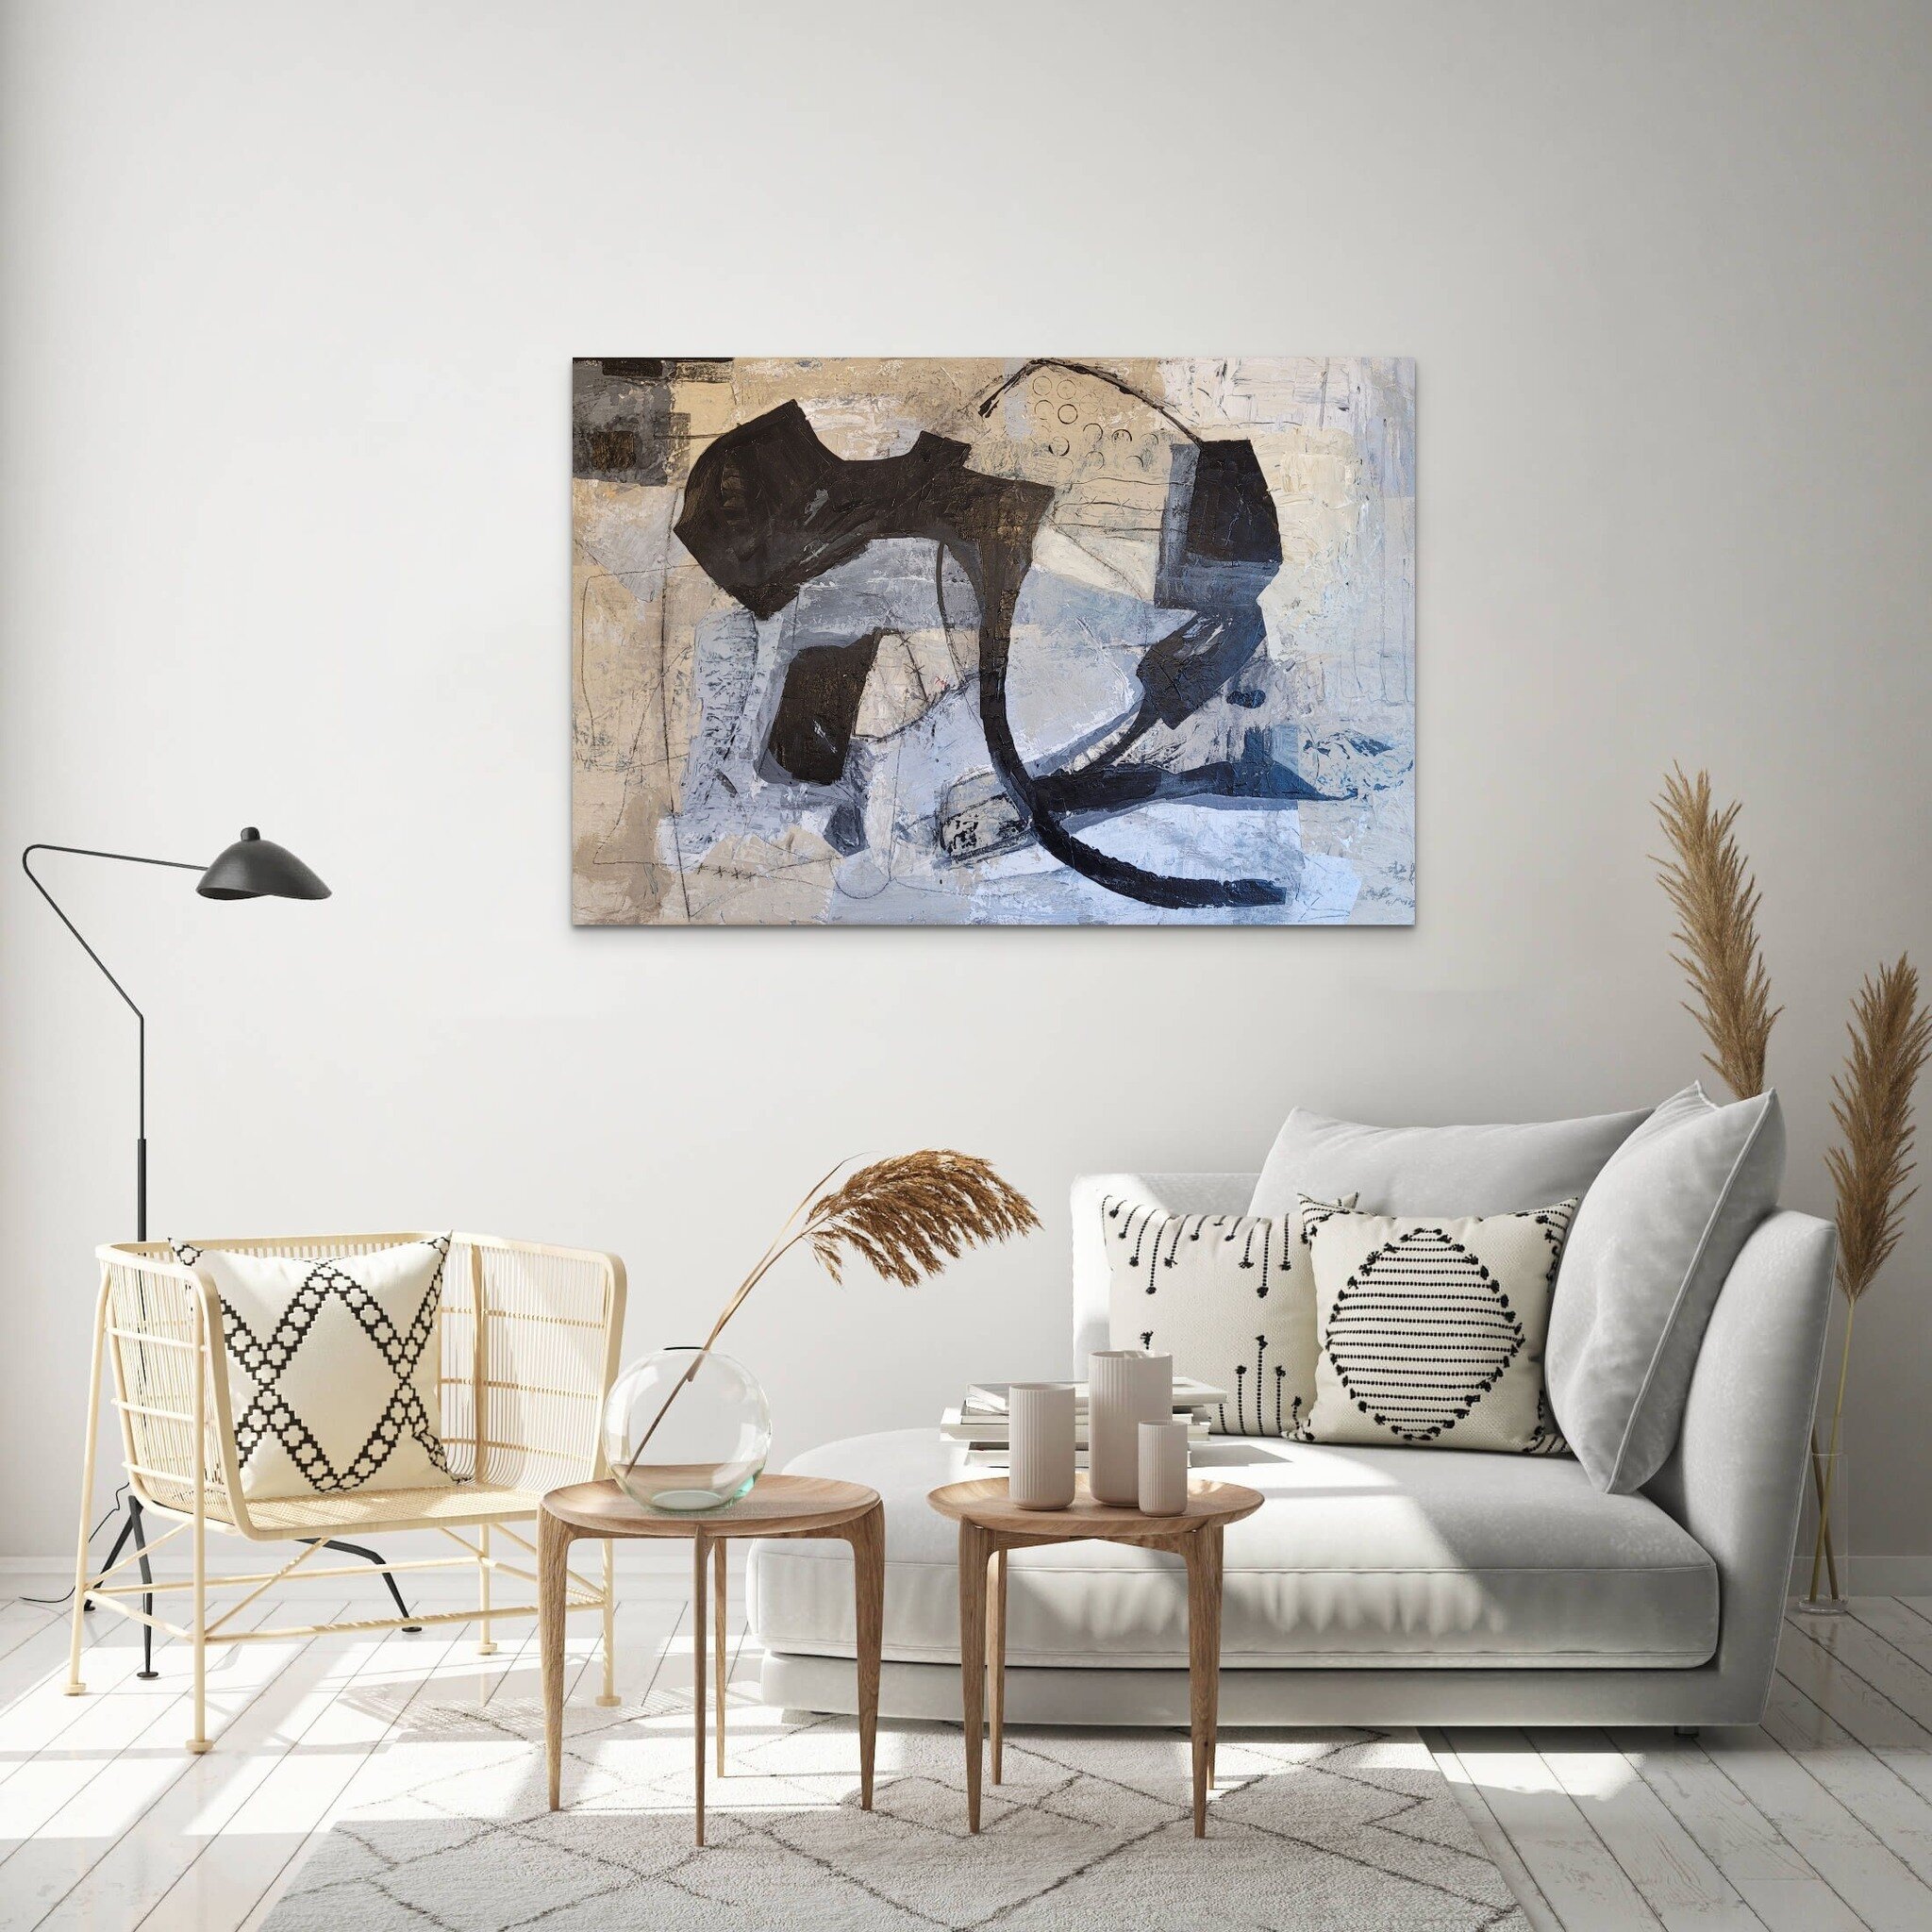 Playing with ArtPlacer by dropping my painting &quot;Time Has Gone By&quot; into virtual rooms. Fun but I can spend soooo much time playing...stopping now and posting :) Do you prefer one of the rooms? 
#artplacer #interiordesign #abstractart #contem